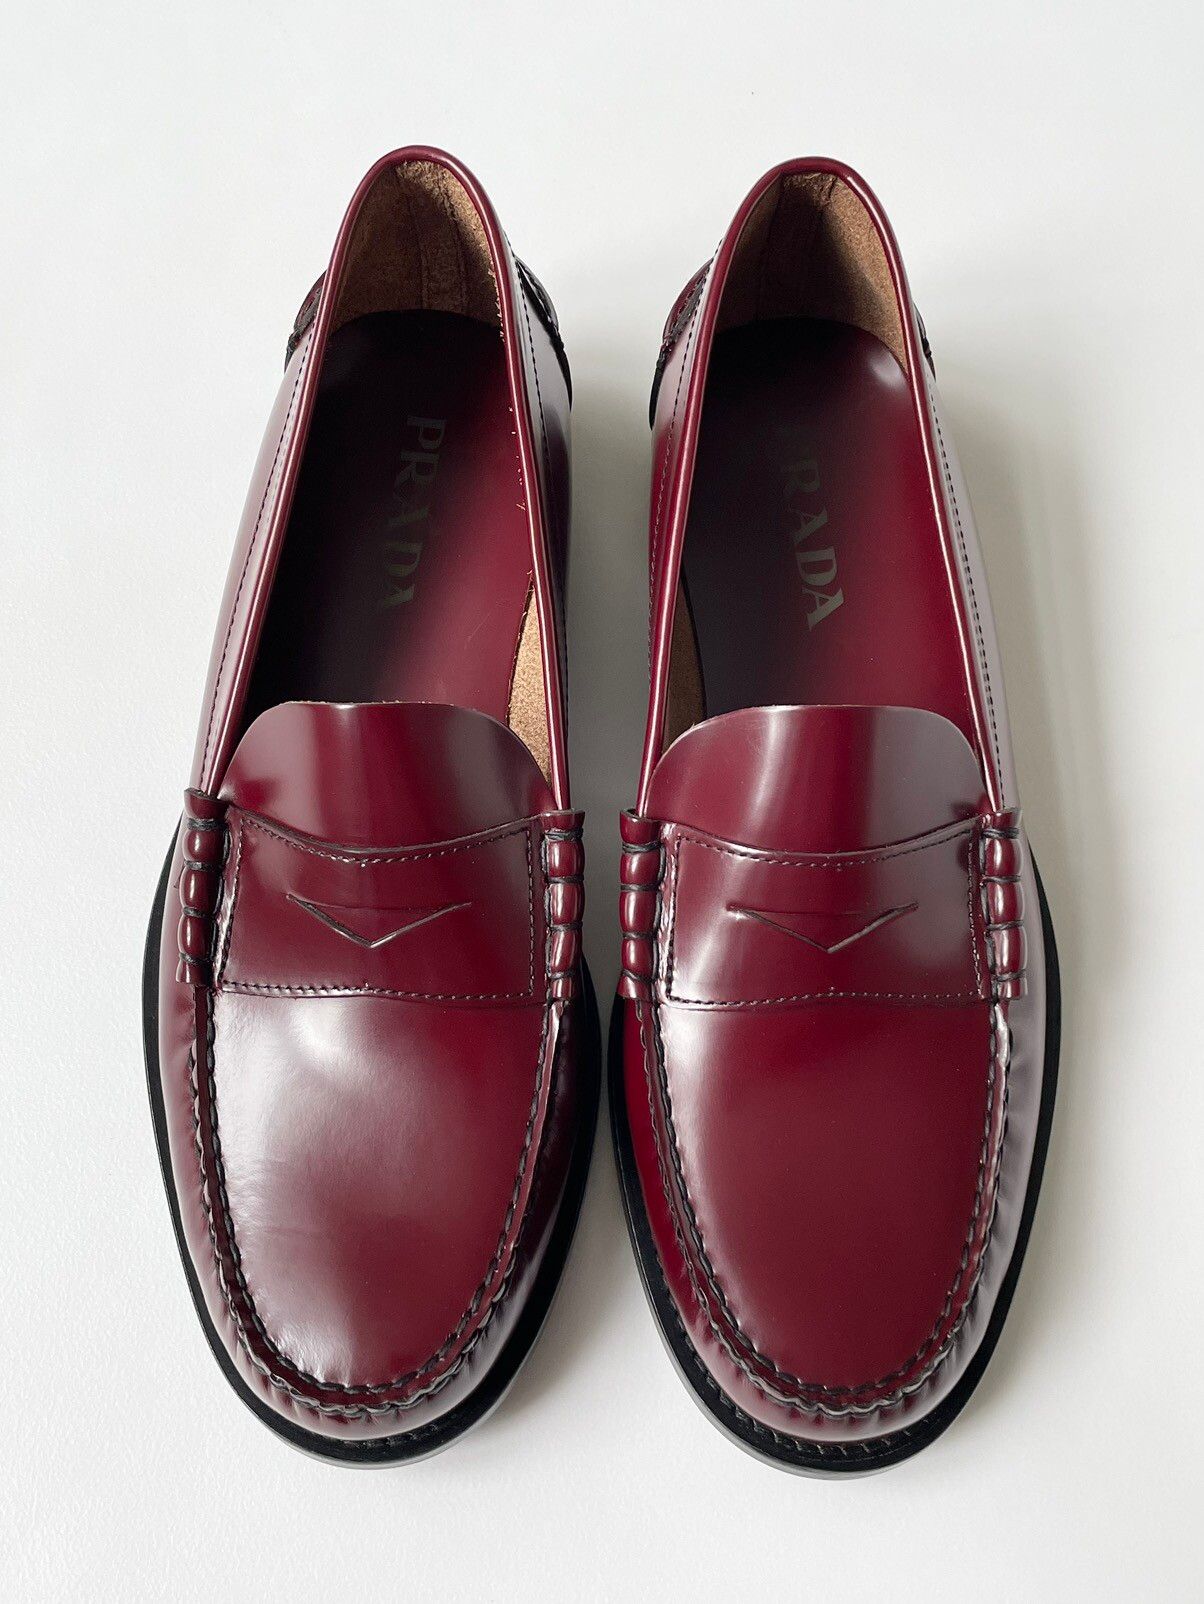 Pre-owned Prada Polished Oxblood Leather Loafers